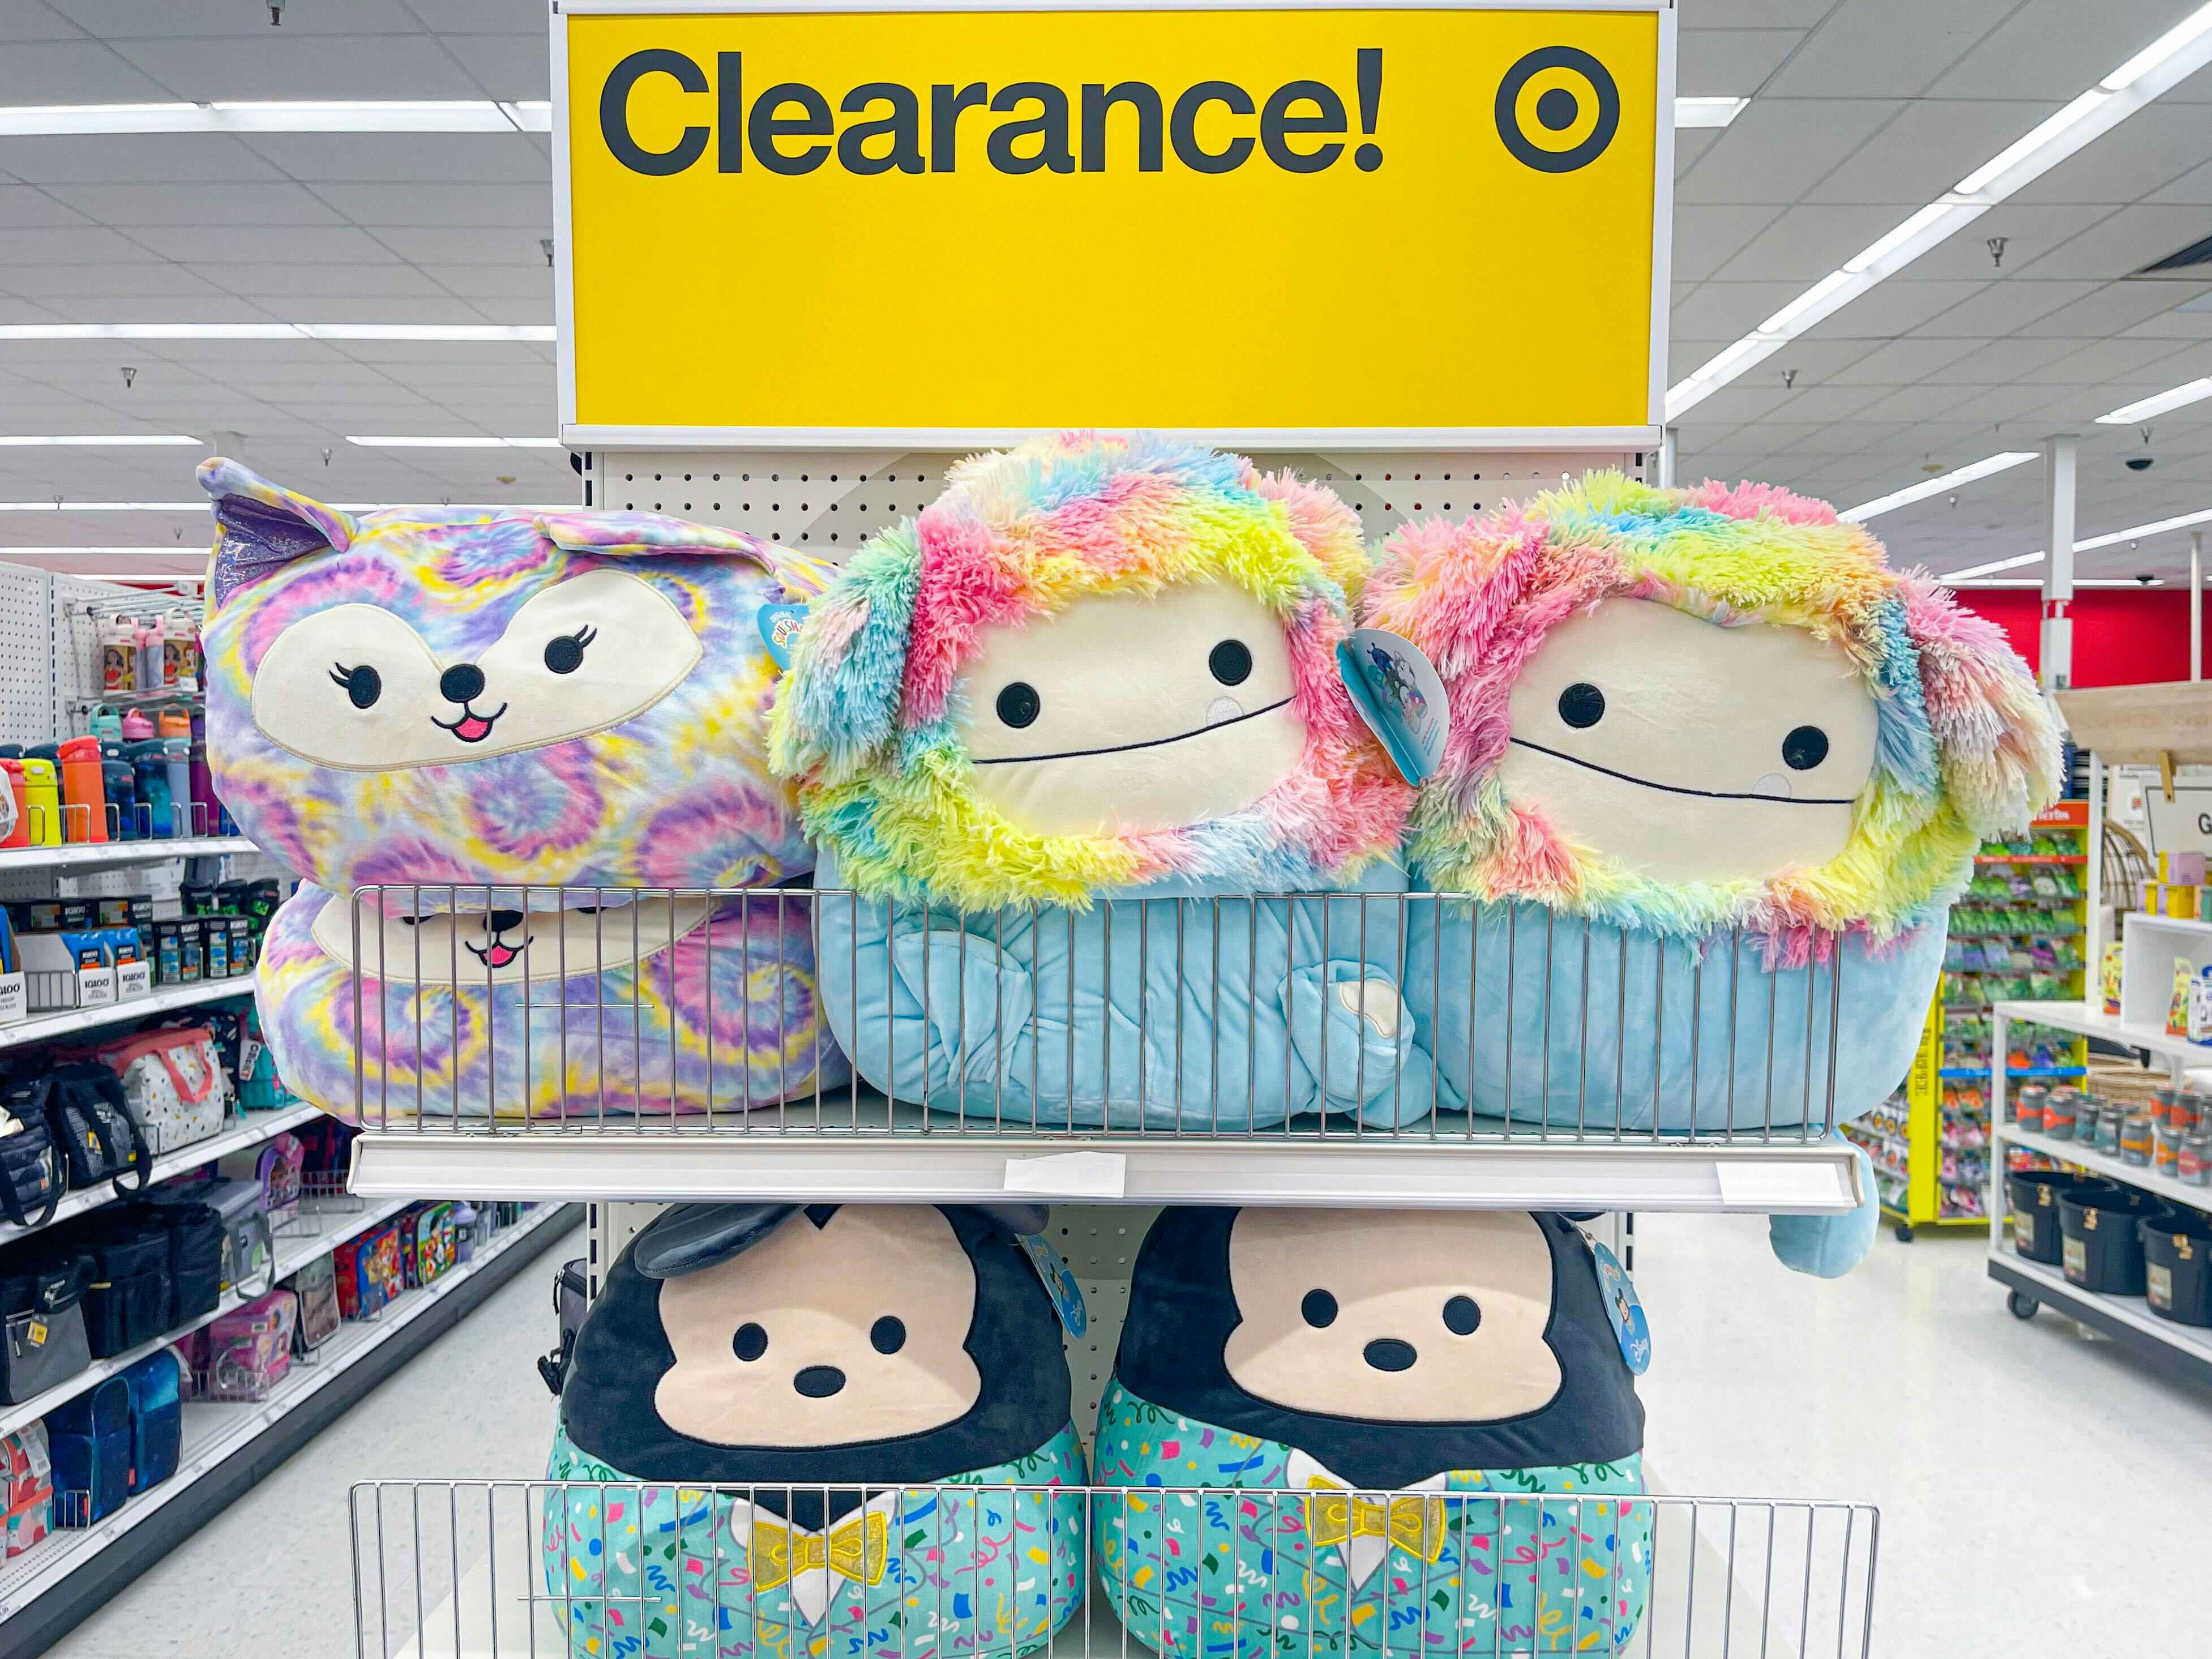 https://prod-cdn-thekrazycouponlady.imgix.net/wp-content/uploads/2022/04/squishmallows-target-2022-8-1650630256-1650630256.jpg?auto=format&fit=fill&q=25